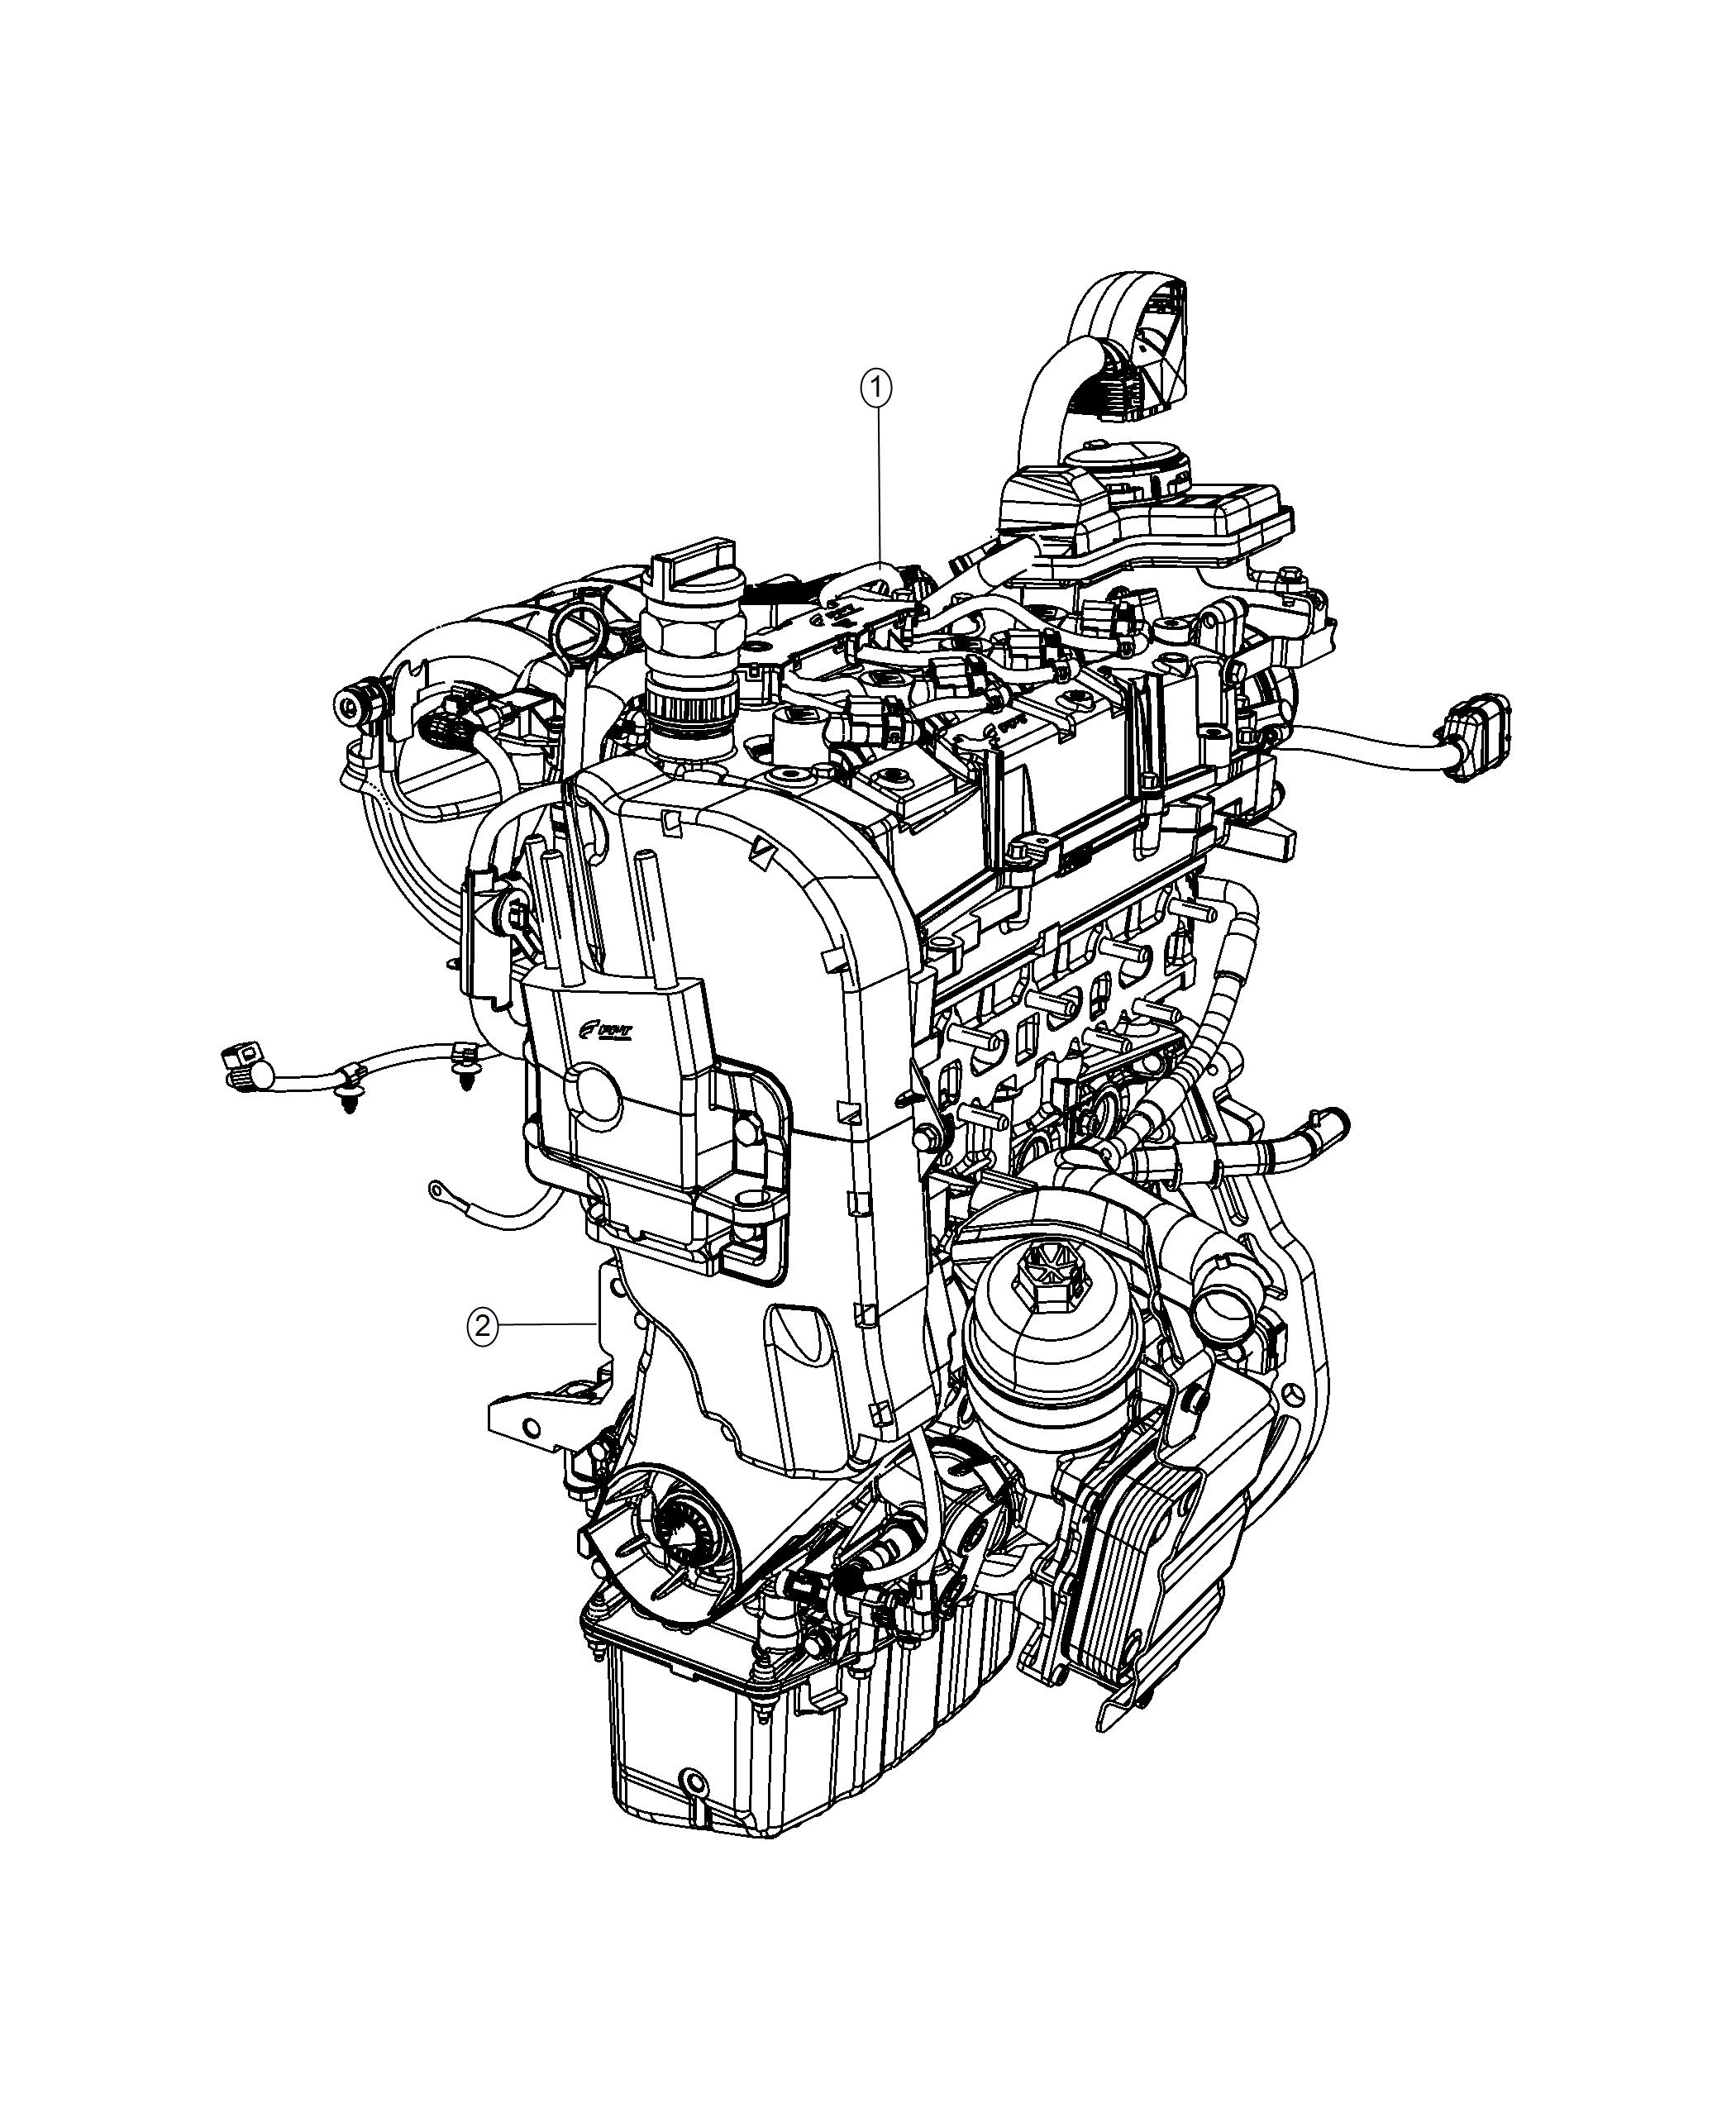 Engine Assembly And Service Long Block 1.4L Turbocharged [1.4L I4 MultiAir Turbo Engine]. Diagram